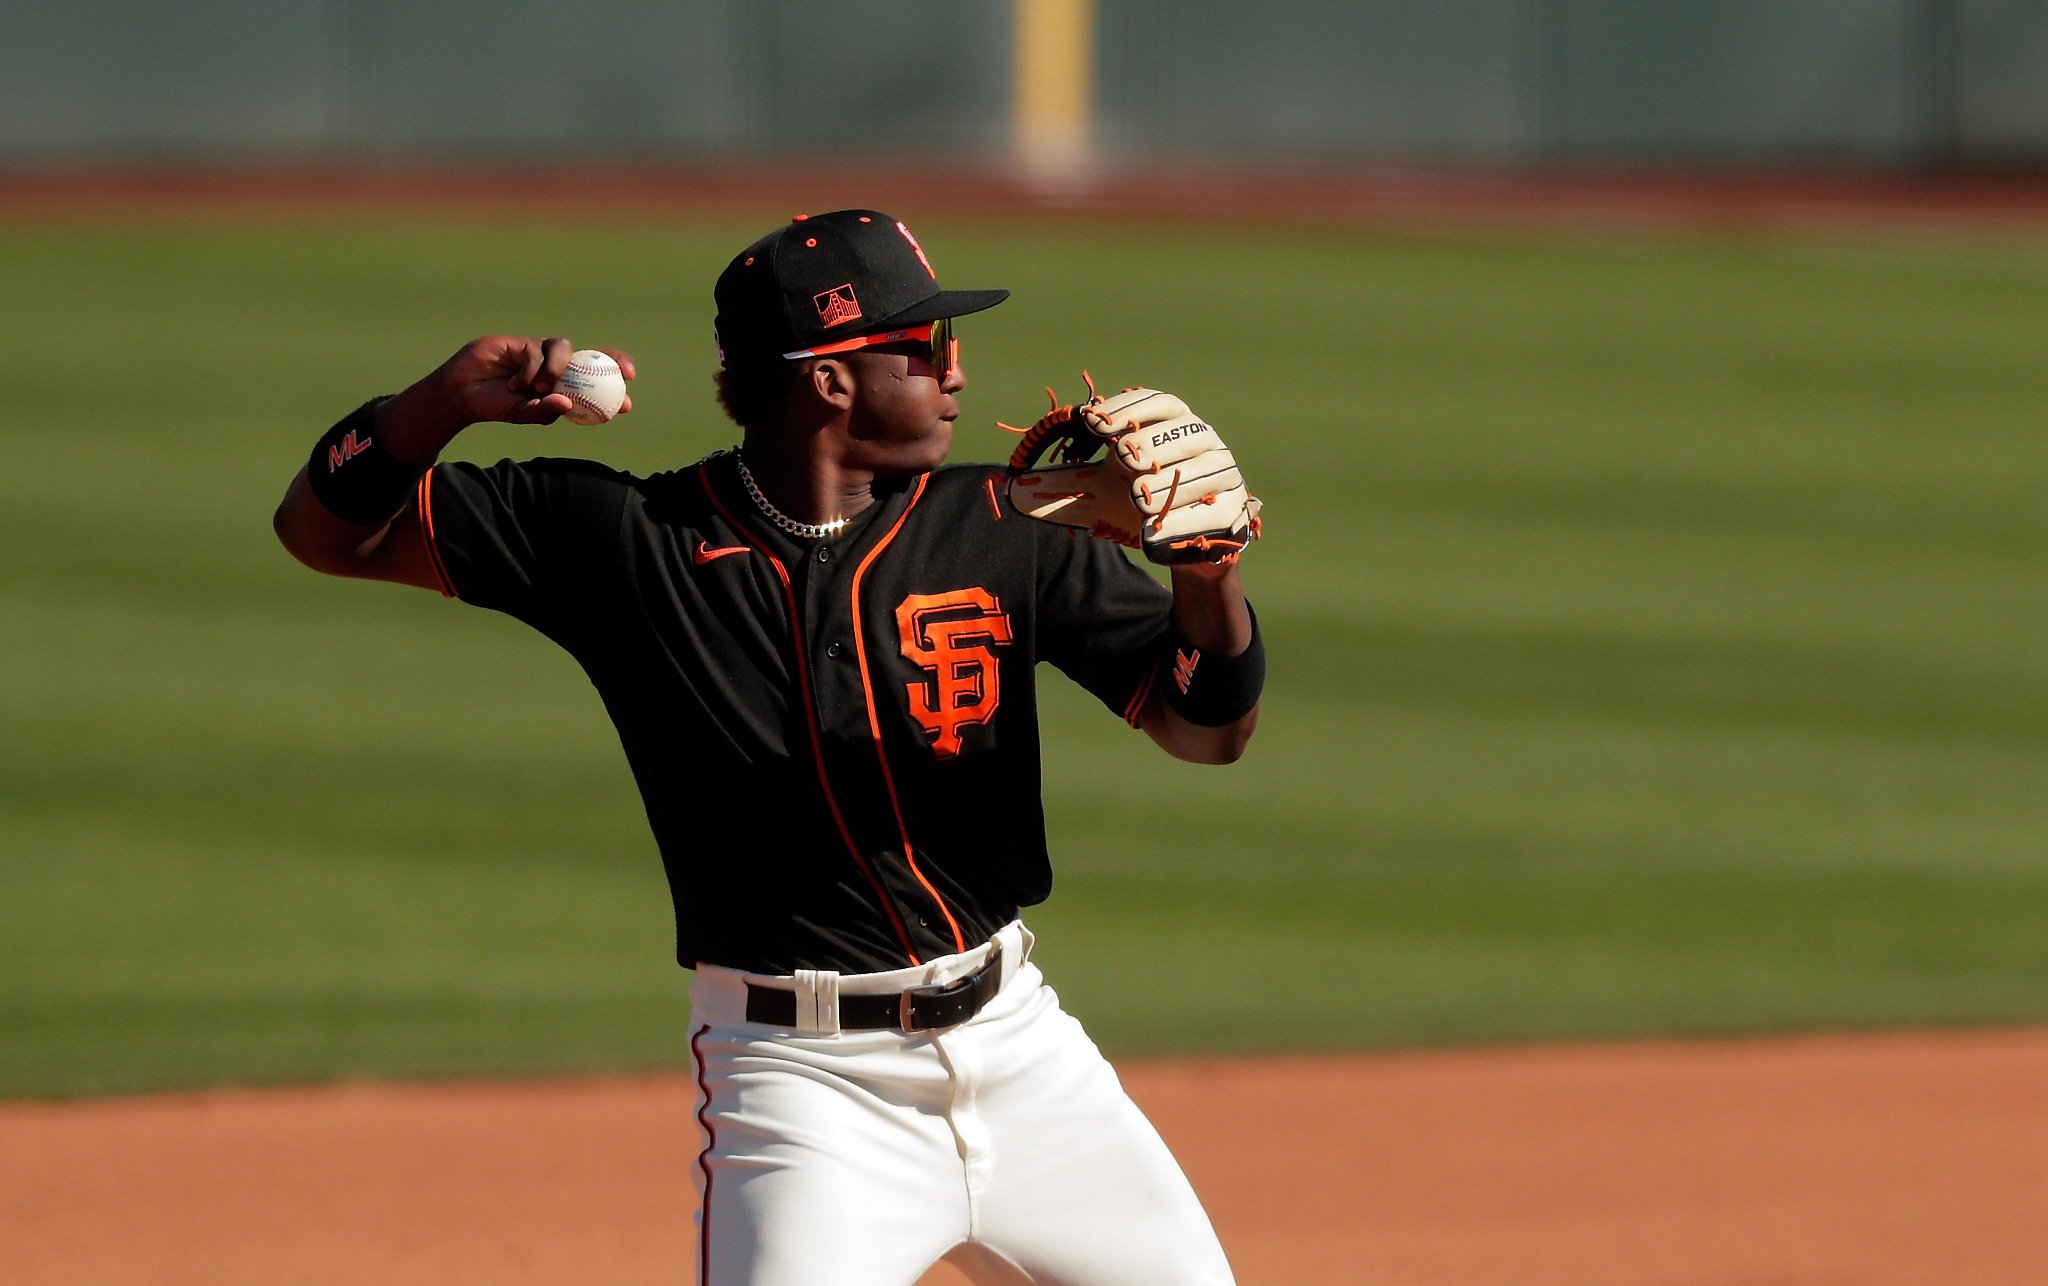 Giants' top prospect Marco Luciano, 19, envisions getting called up in a  year